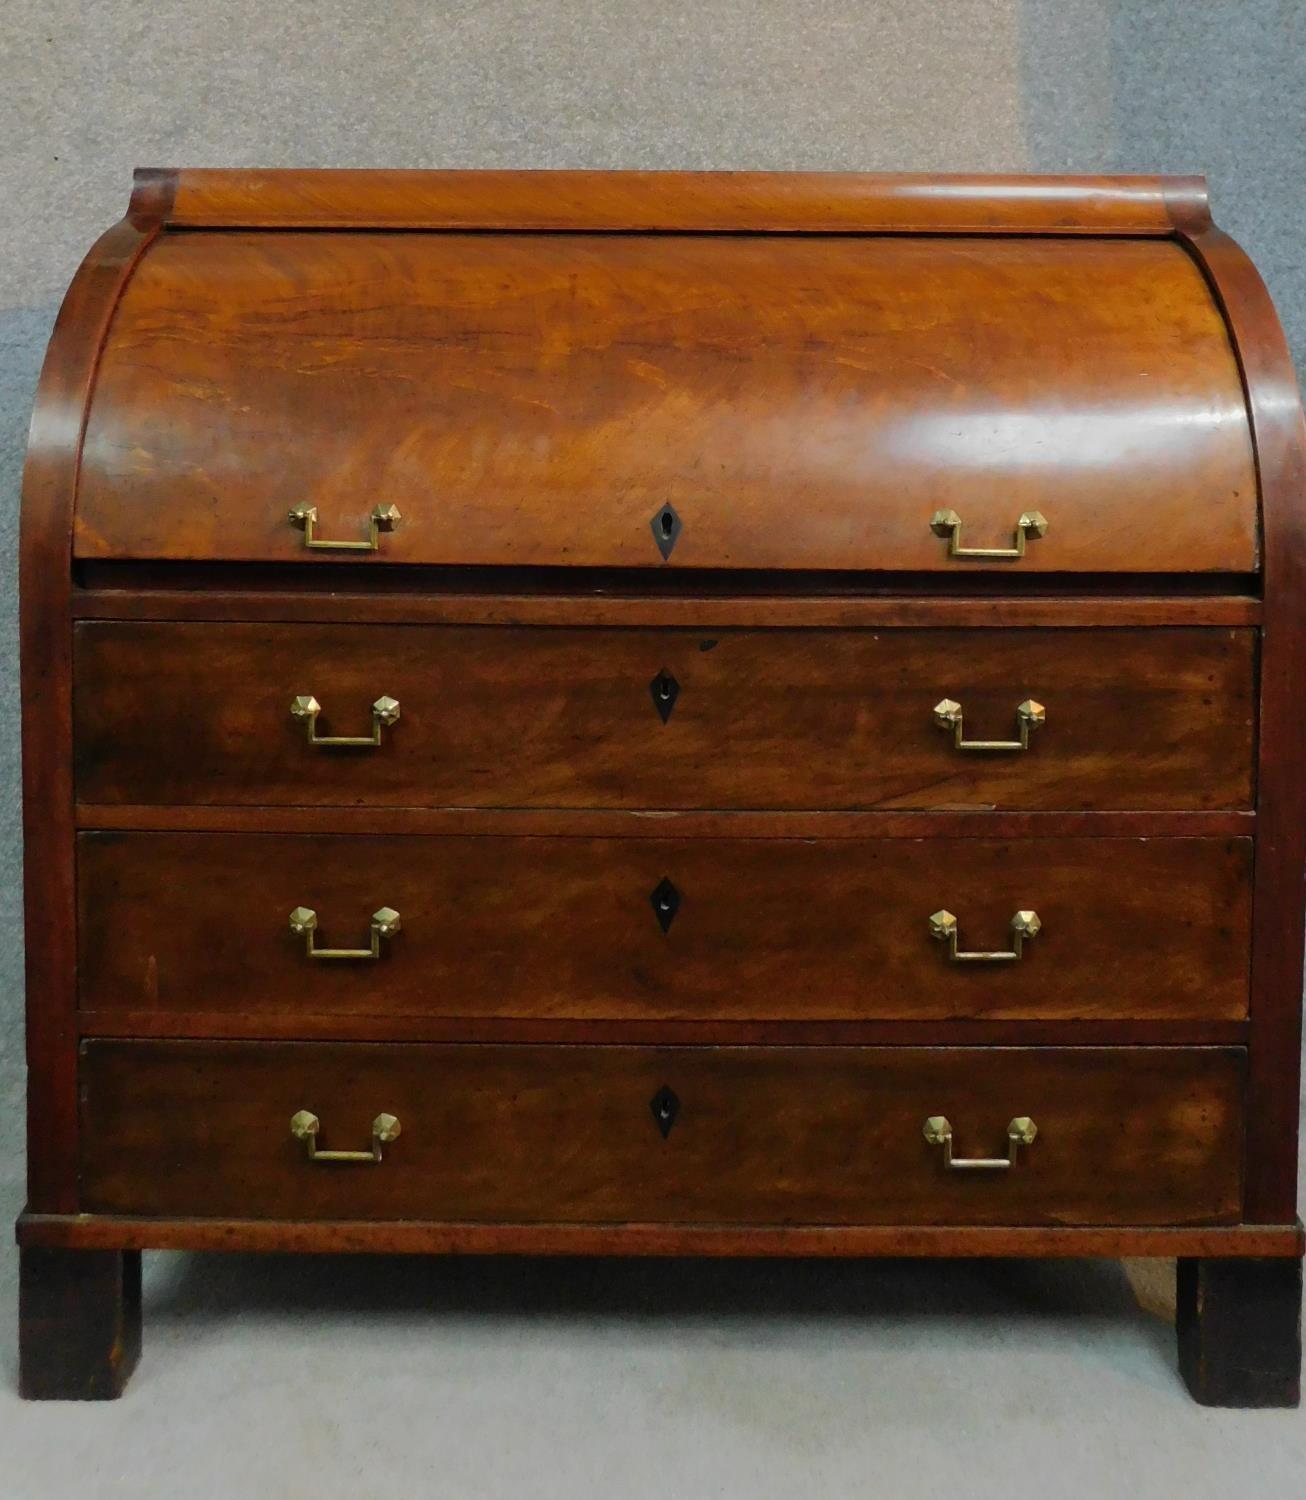 A 19th century continental mahogany cylinder top bureau with tooled leather lined slide out